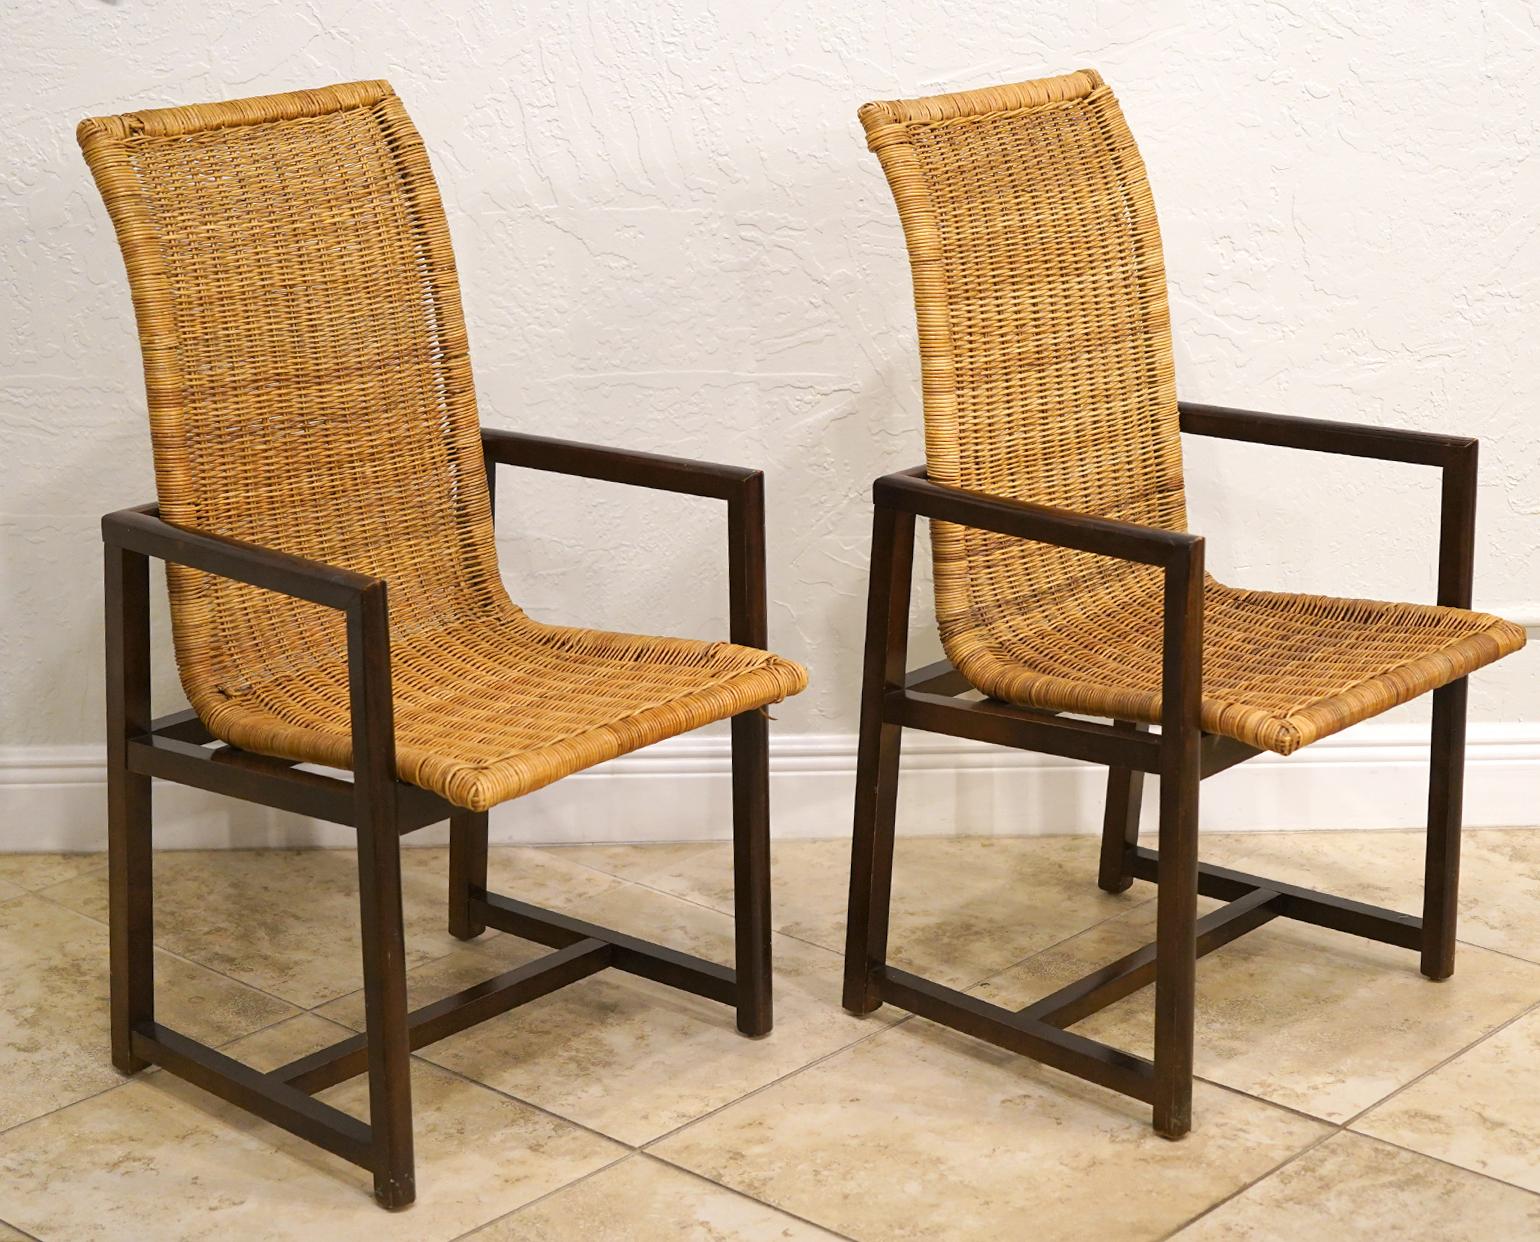 Wonderful Set of 10 High Back Woven Rattan and Beach Wood Dining Chairs 3